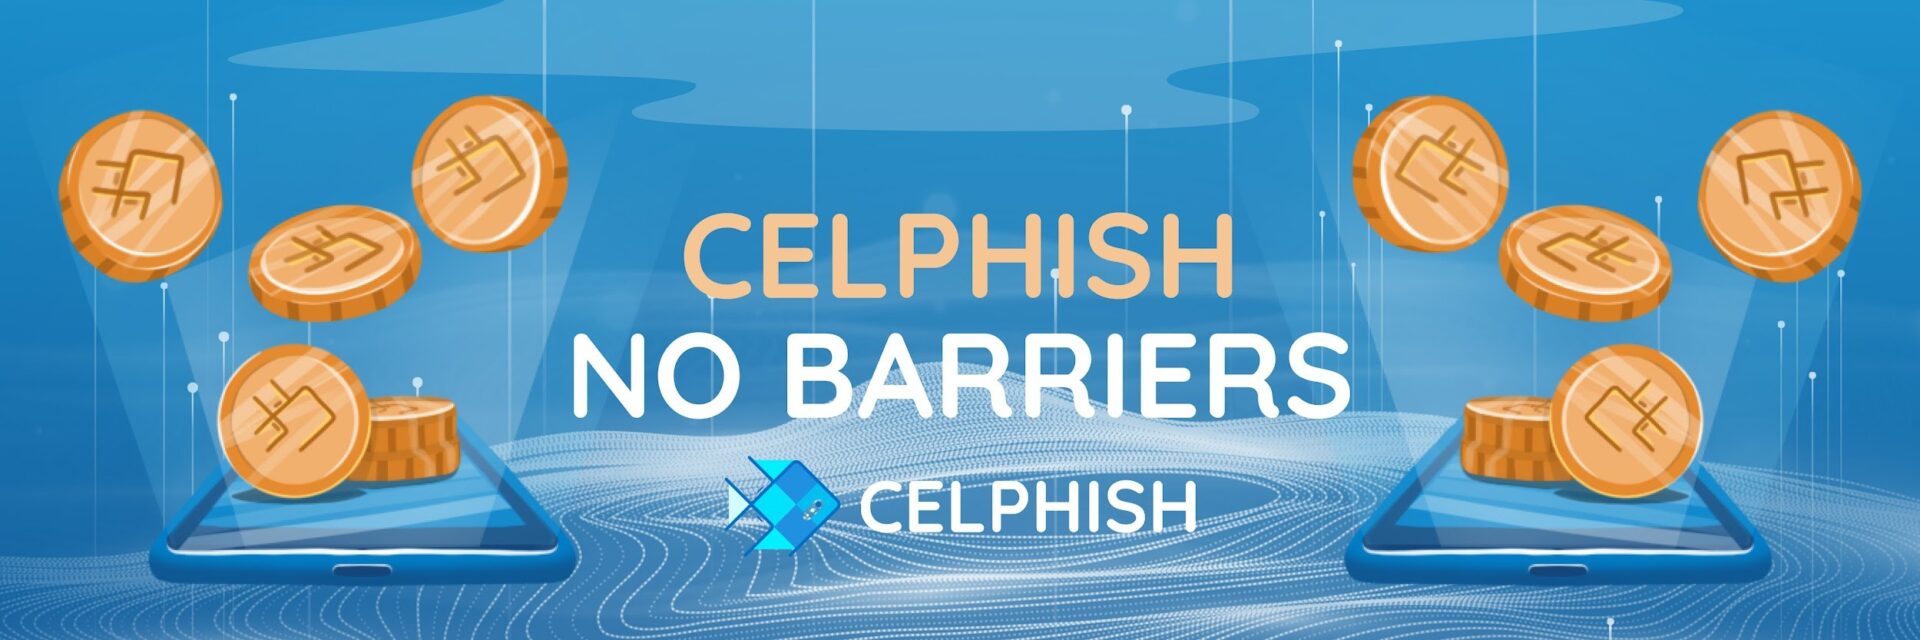 Celphish Finance (CELP) Could Be The Biggest Decentralized Exchange To Trade Bitcoin, Ethereum, And Other Crypto Assets Securely